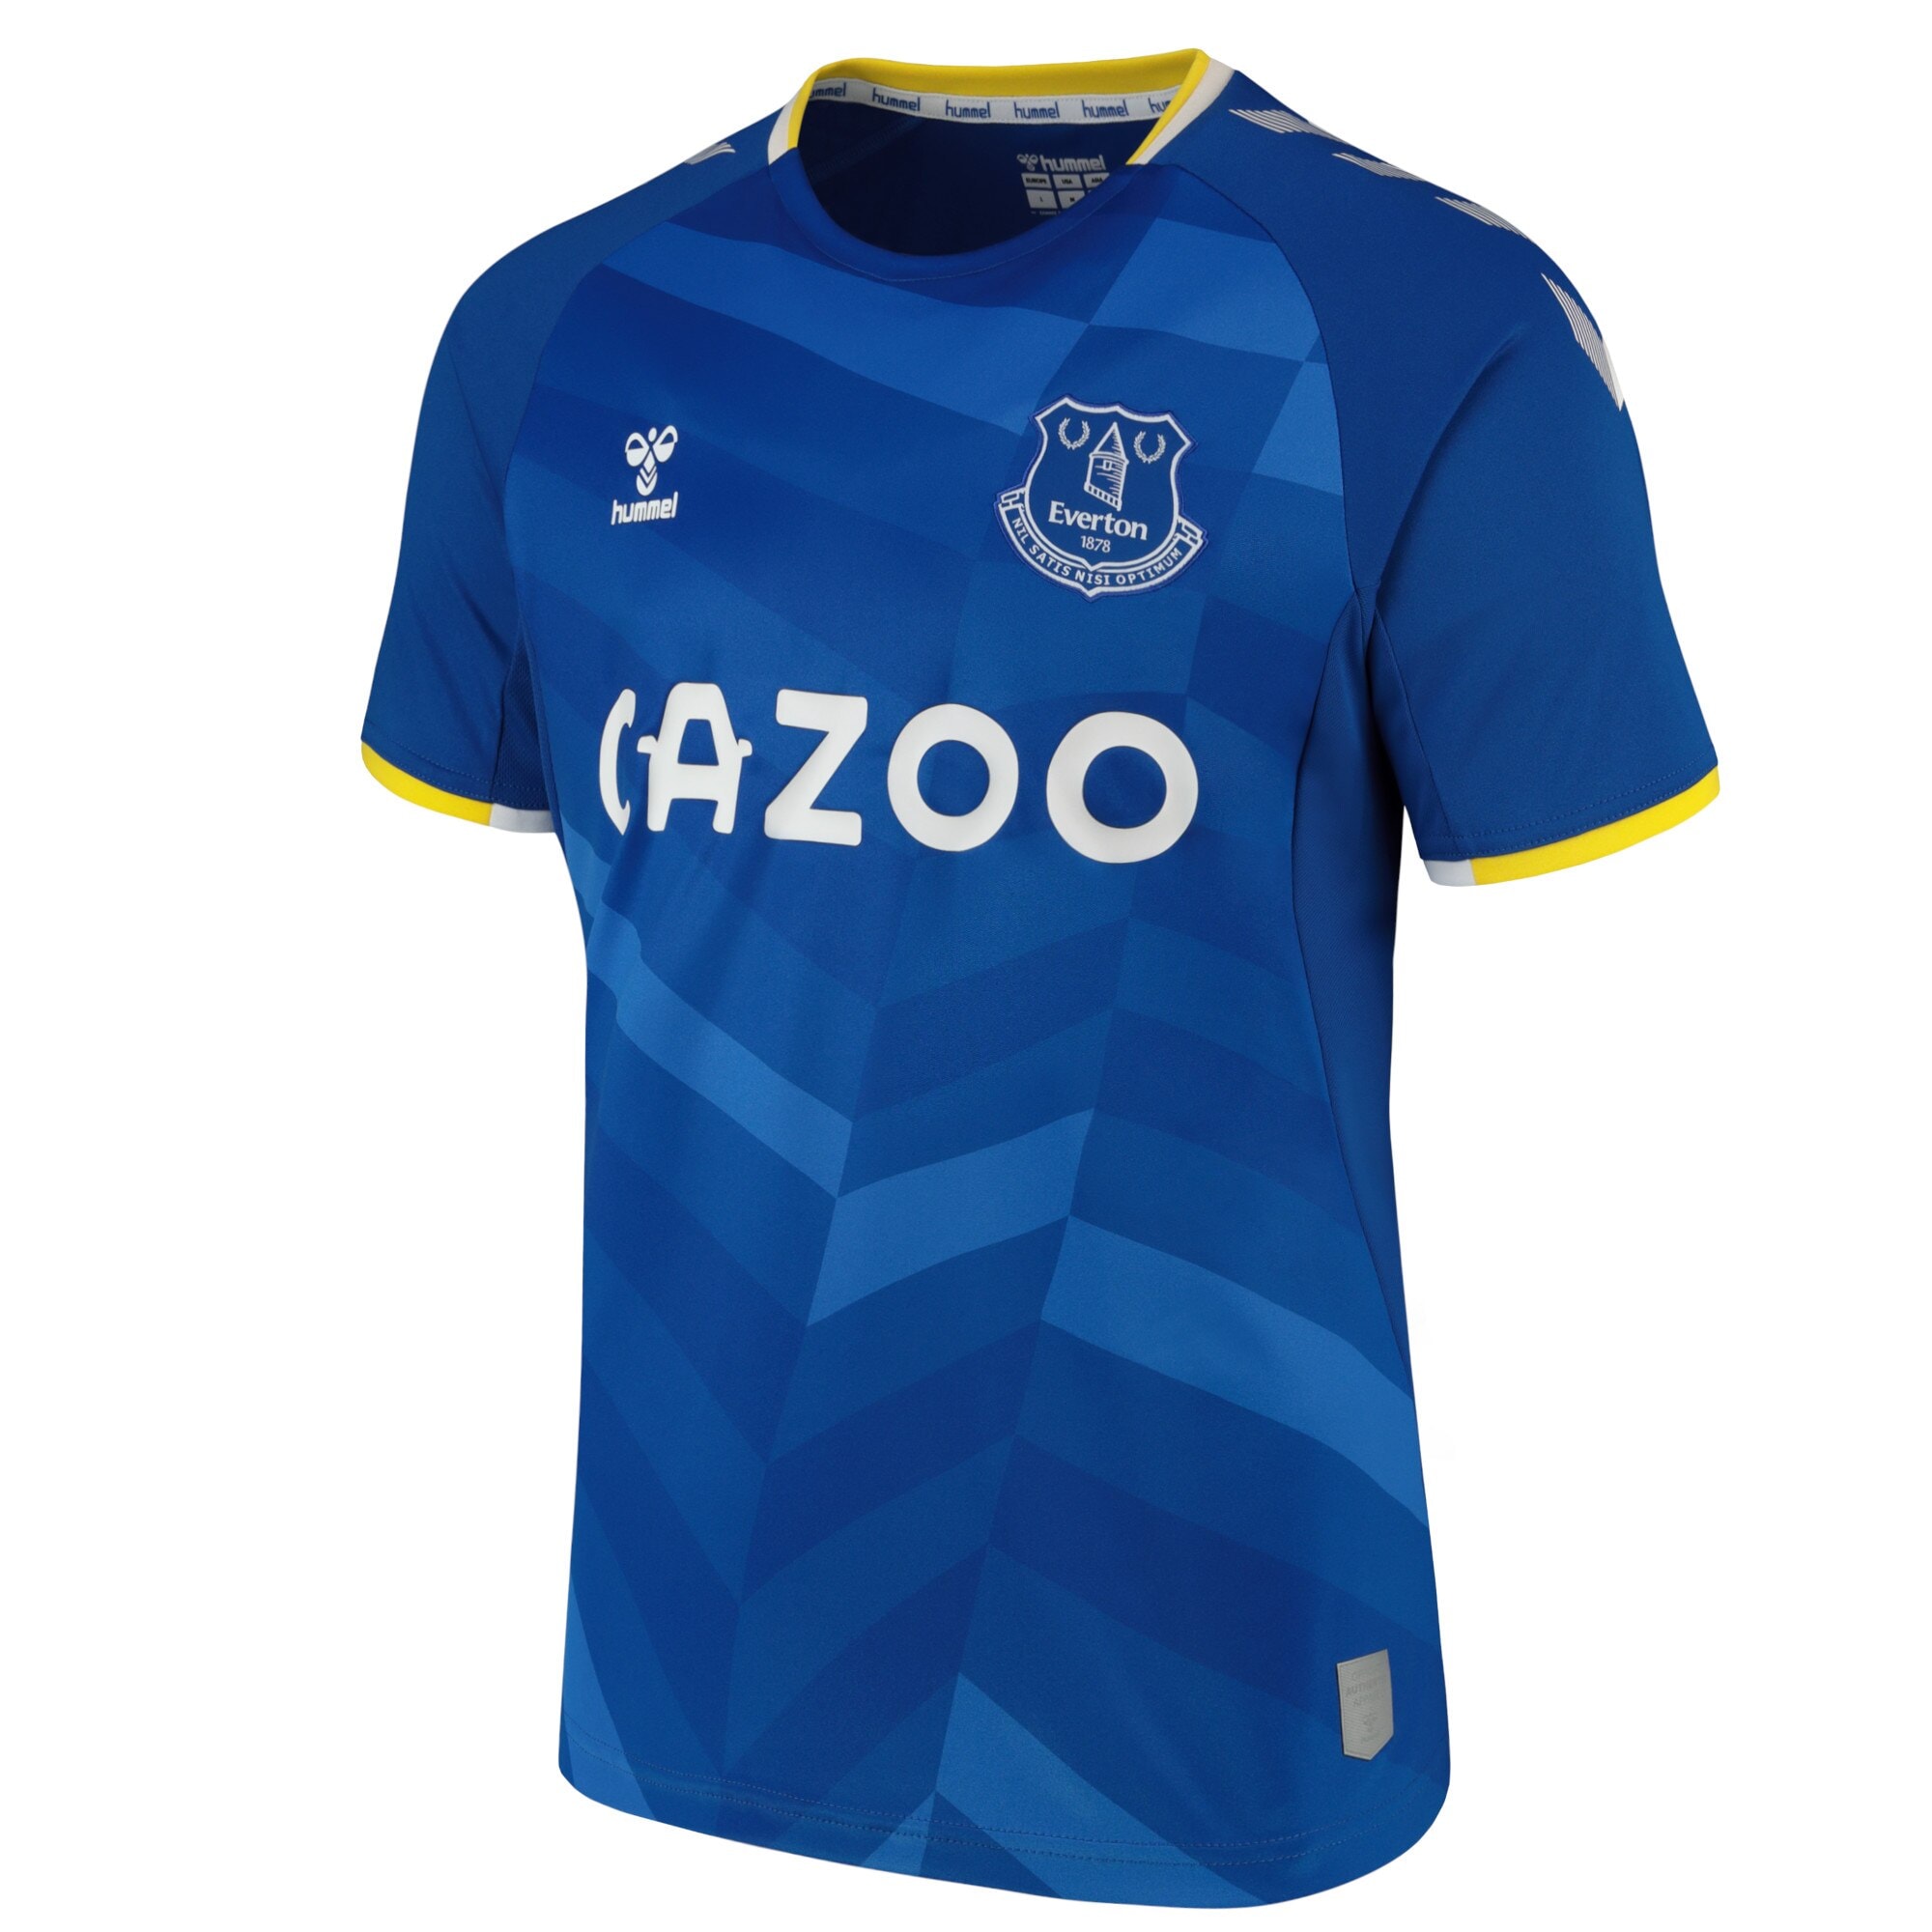 Everton Cup Home Shirt - 2021-22 with Townsend 14 printing